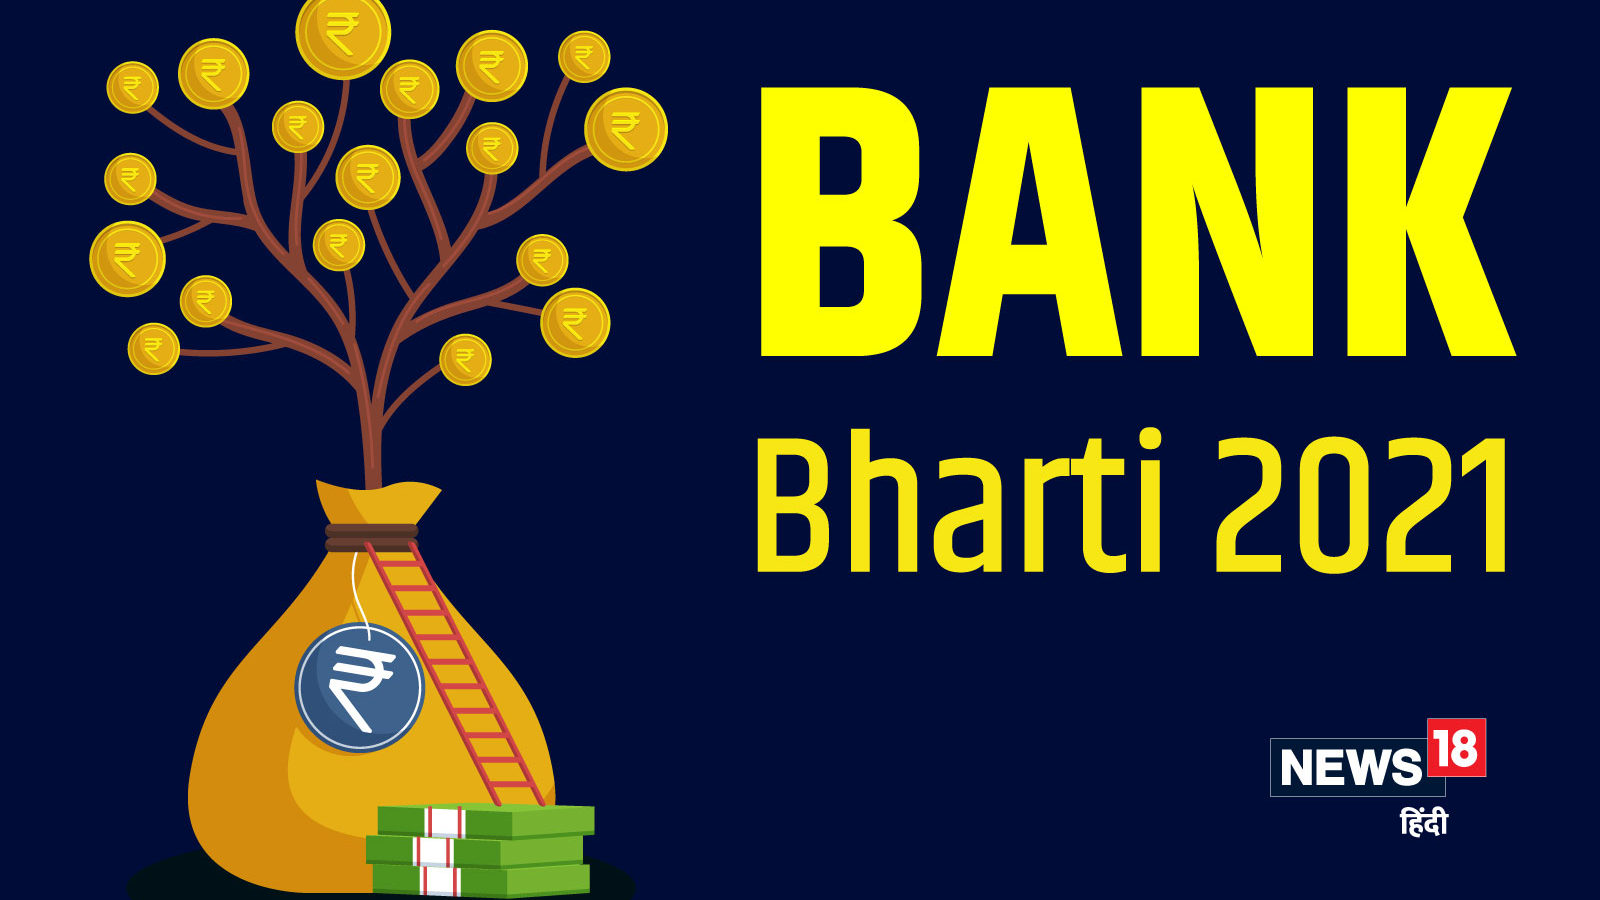 Bank Bharti 2021 Jammu and Kashmir Bank invited applications for the PO and Clerk posts